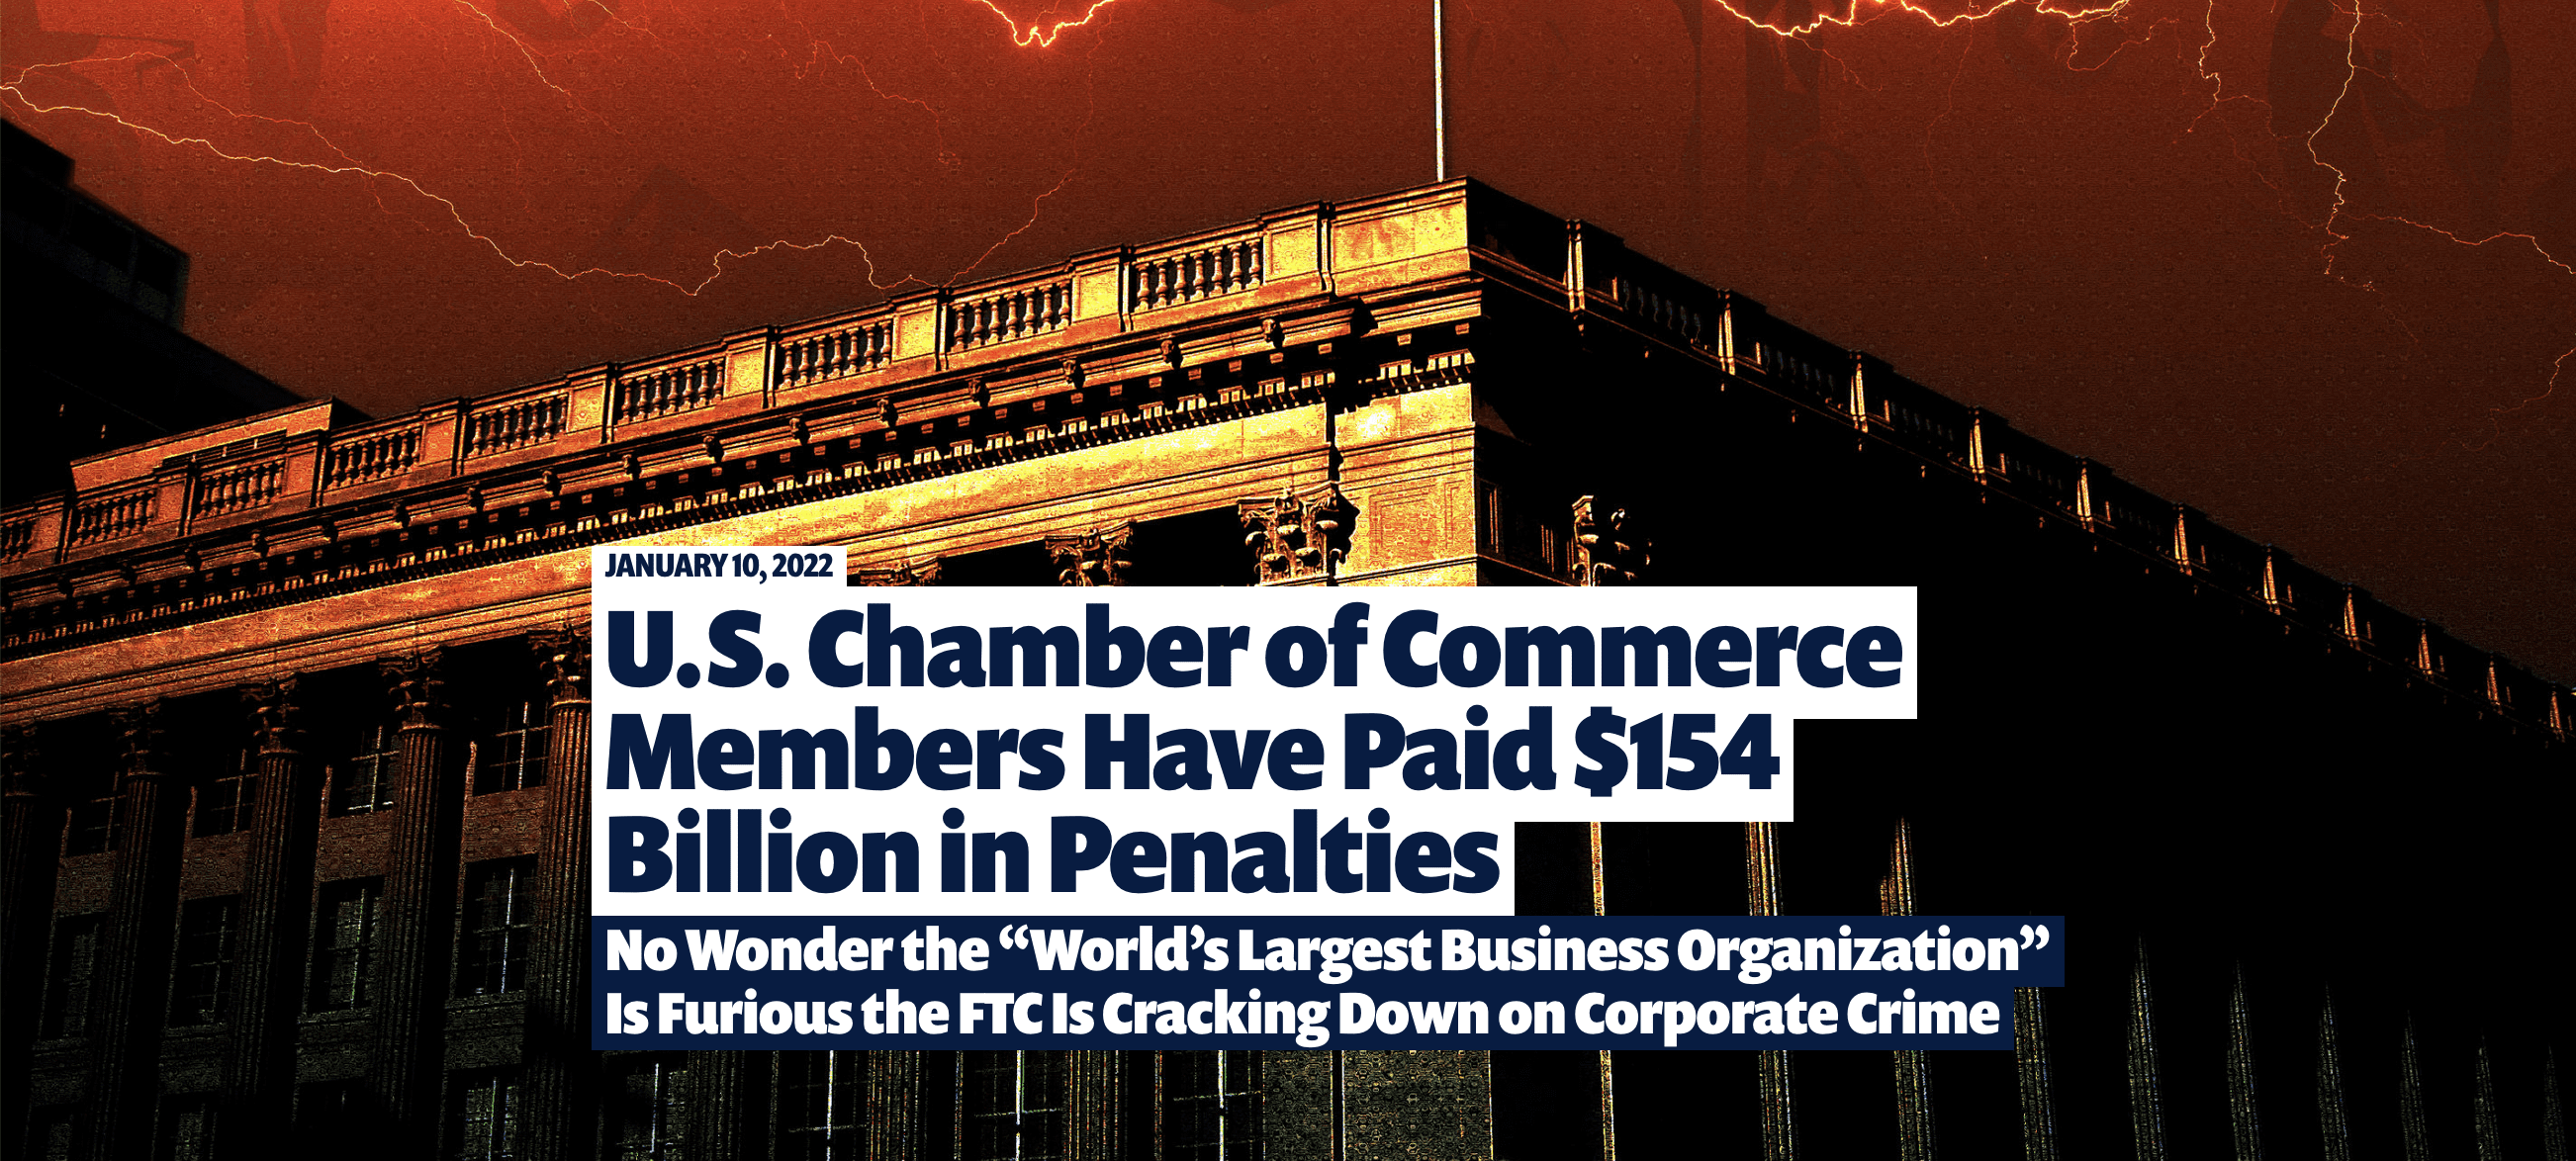 Image of front of government building with lighting in a red sky above it and the words, U.S. Chamber of Commerce Members Have Paid $154 Billion in Penalties